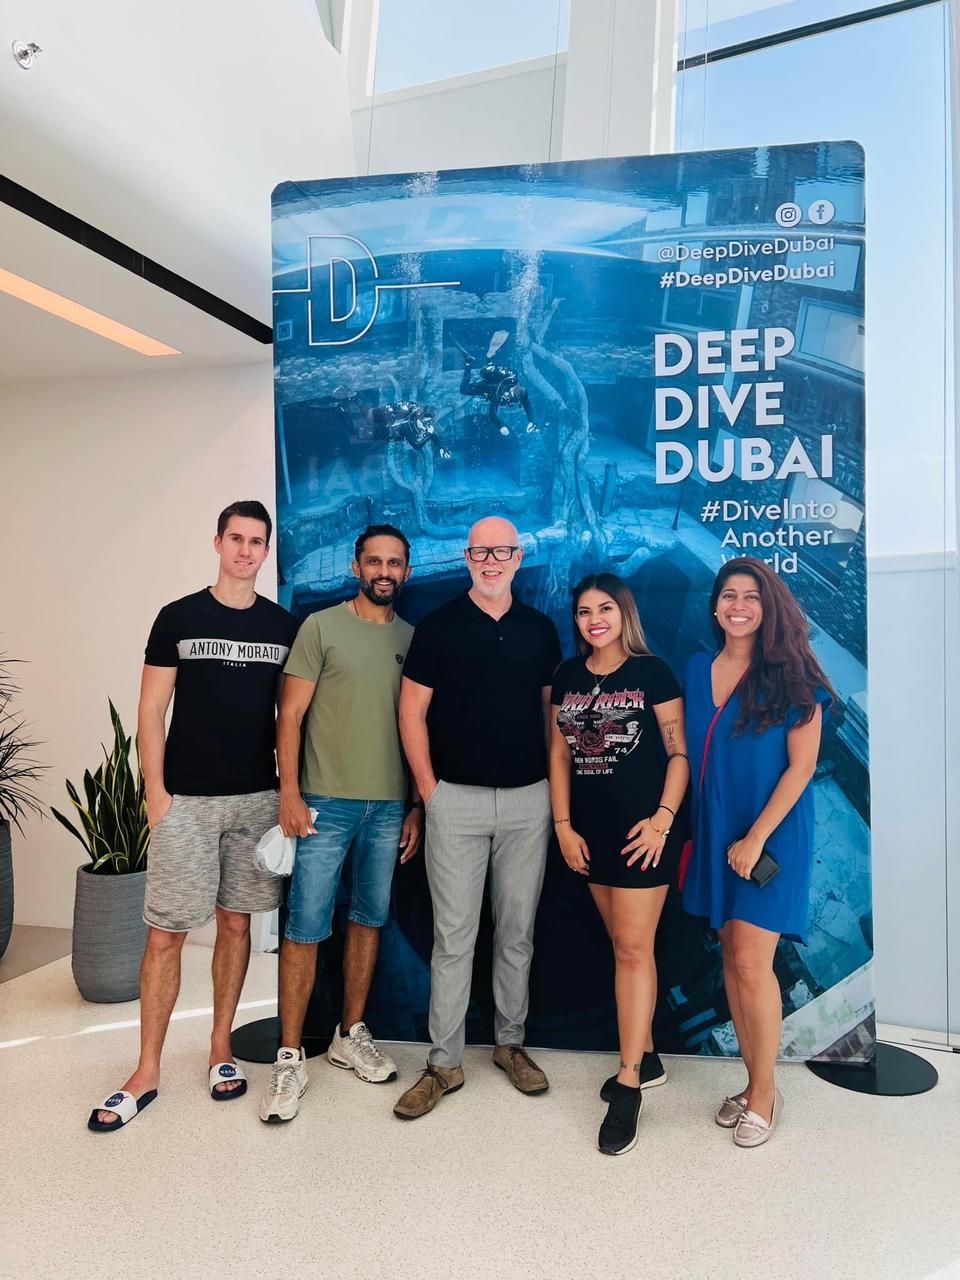 Deep Dive Dubai Challenge yourself in the deepest pool in the world